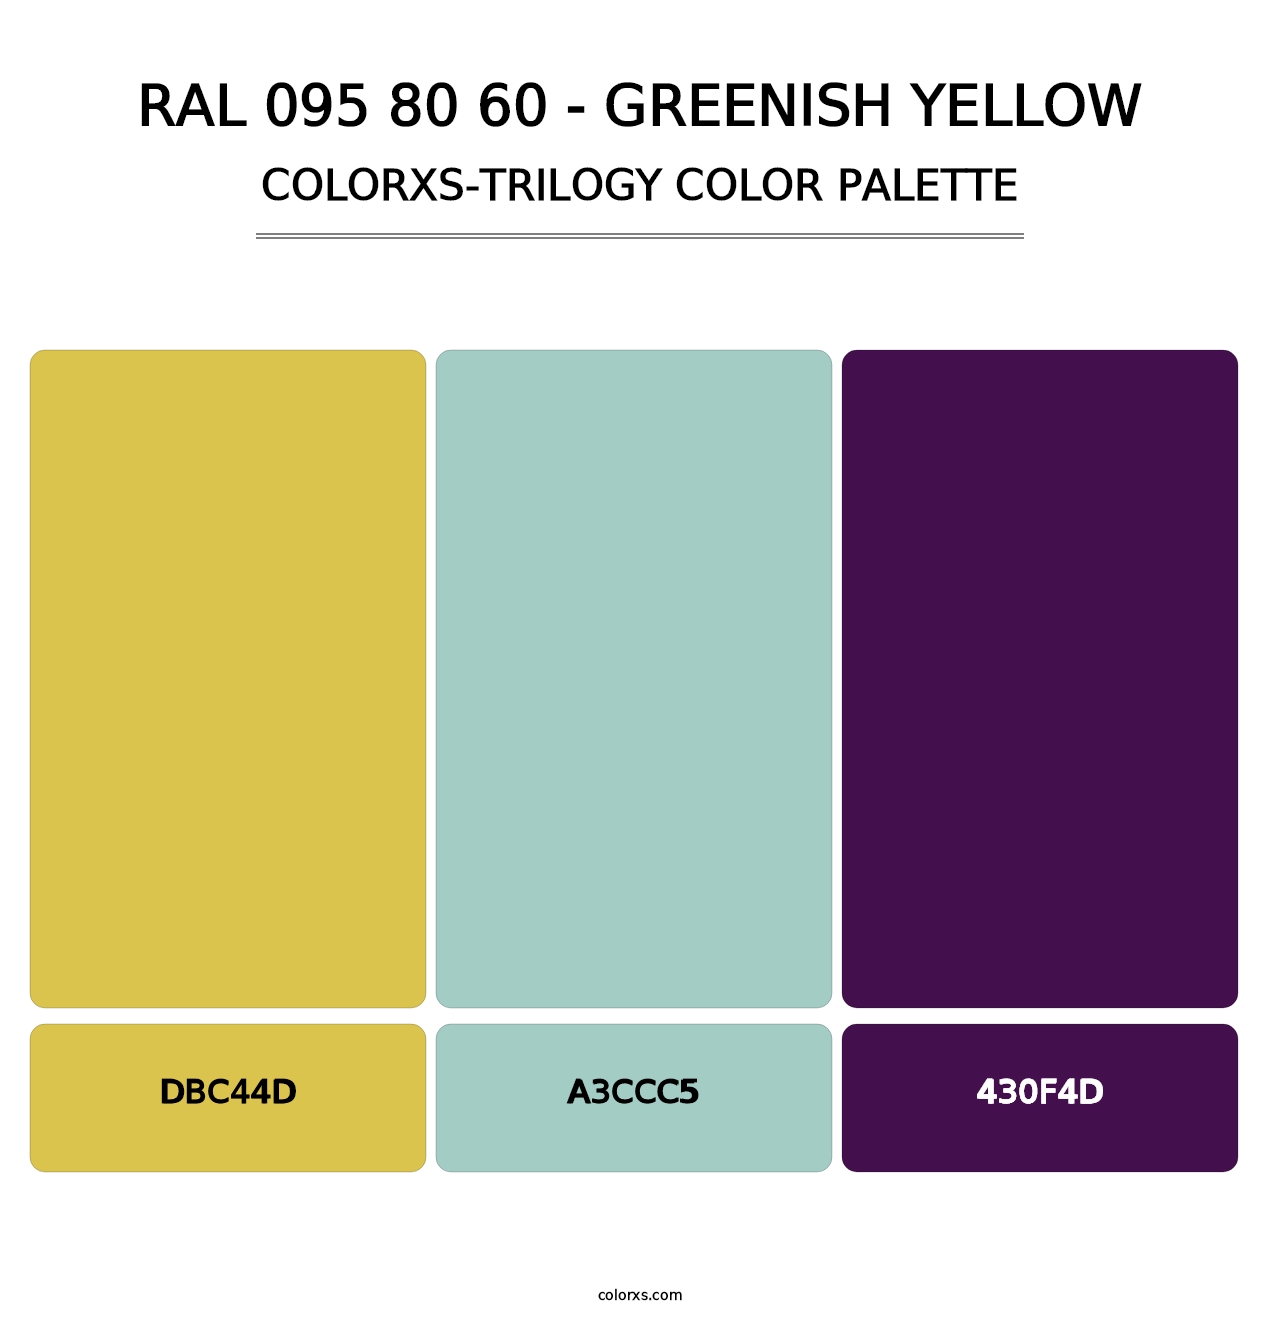 RAL 095 80 60 - Greenish Yellow - Colorxs Trilogy Palette